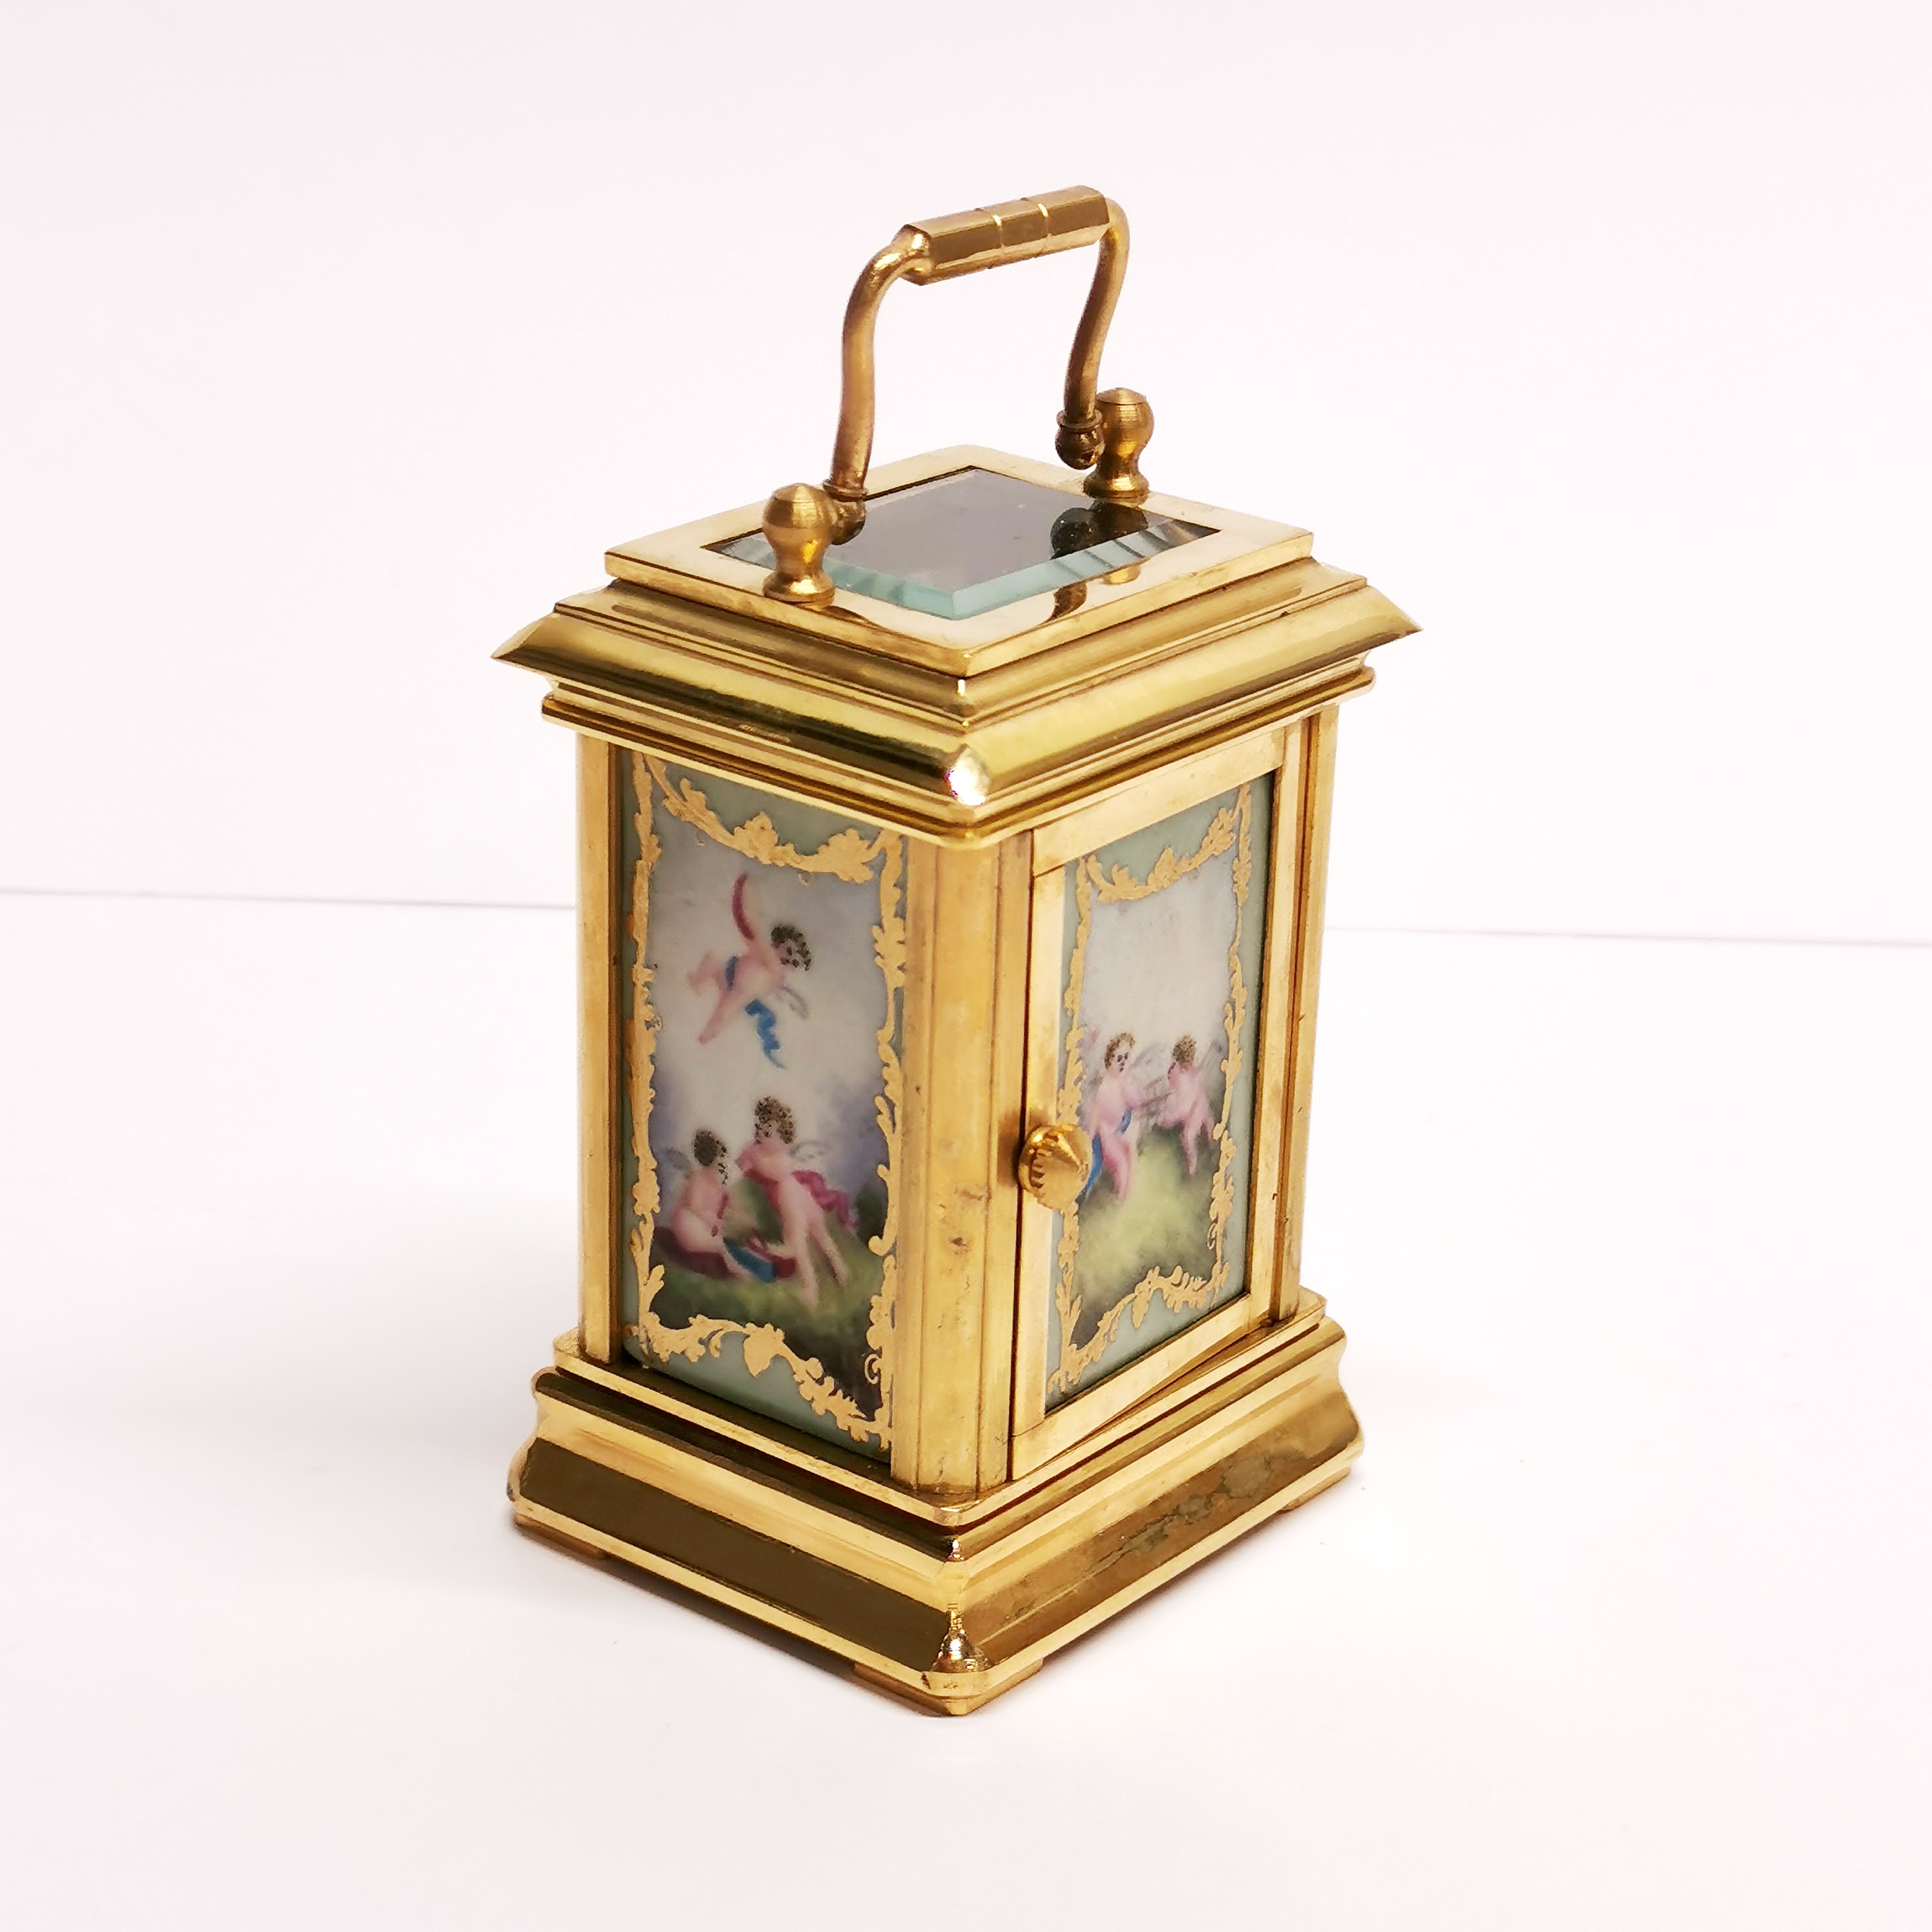 A small gilt brass carriage clock with porcelain panels, H. 10cm. - Image 2 of 3